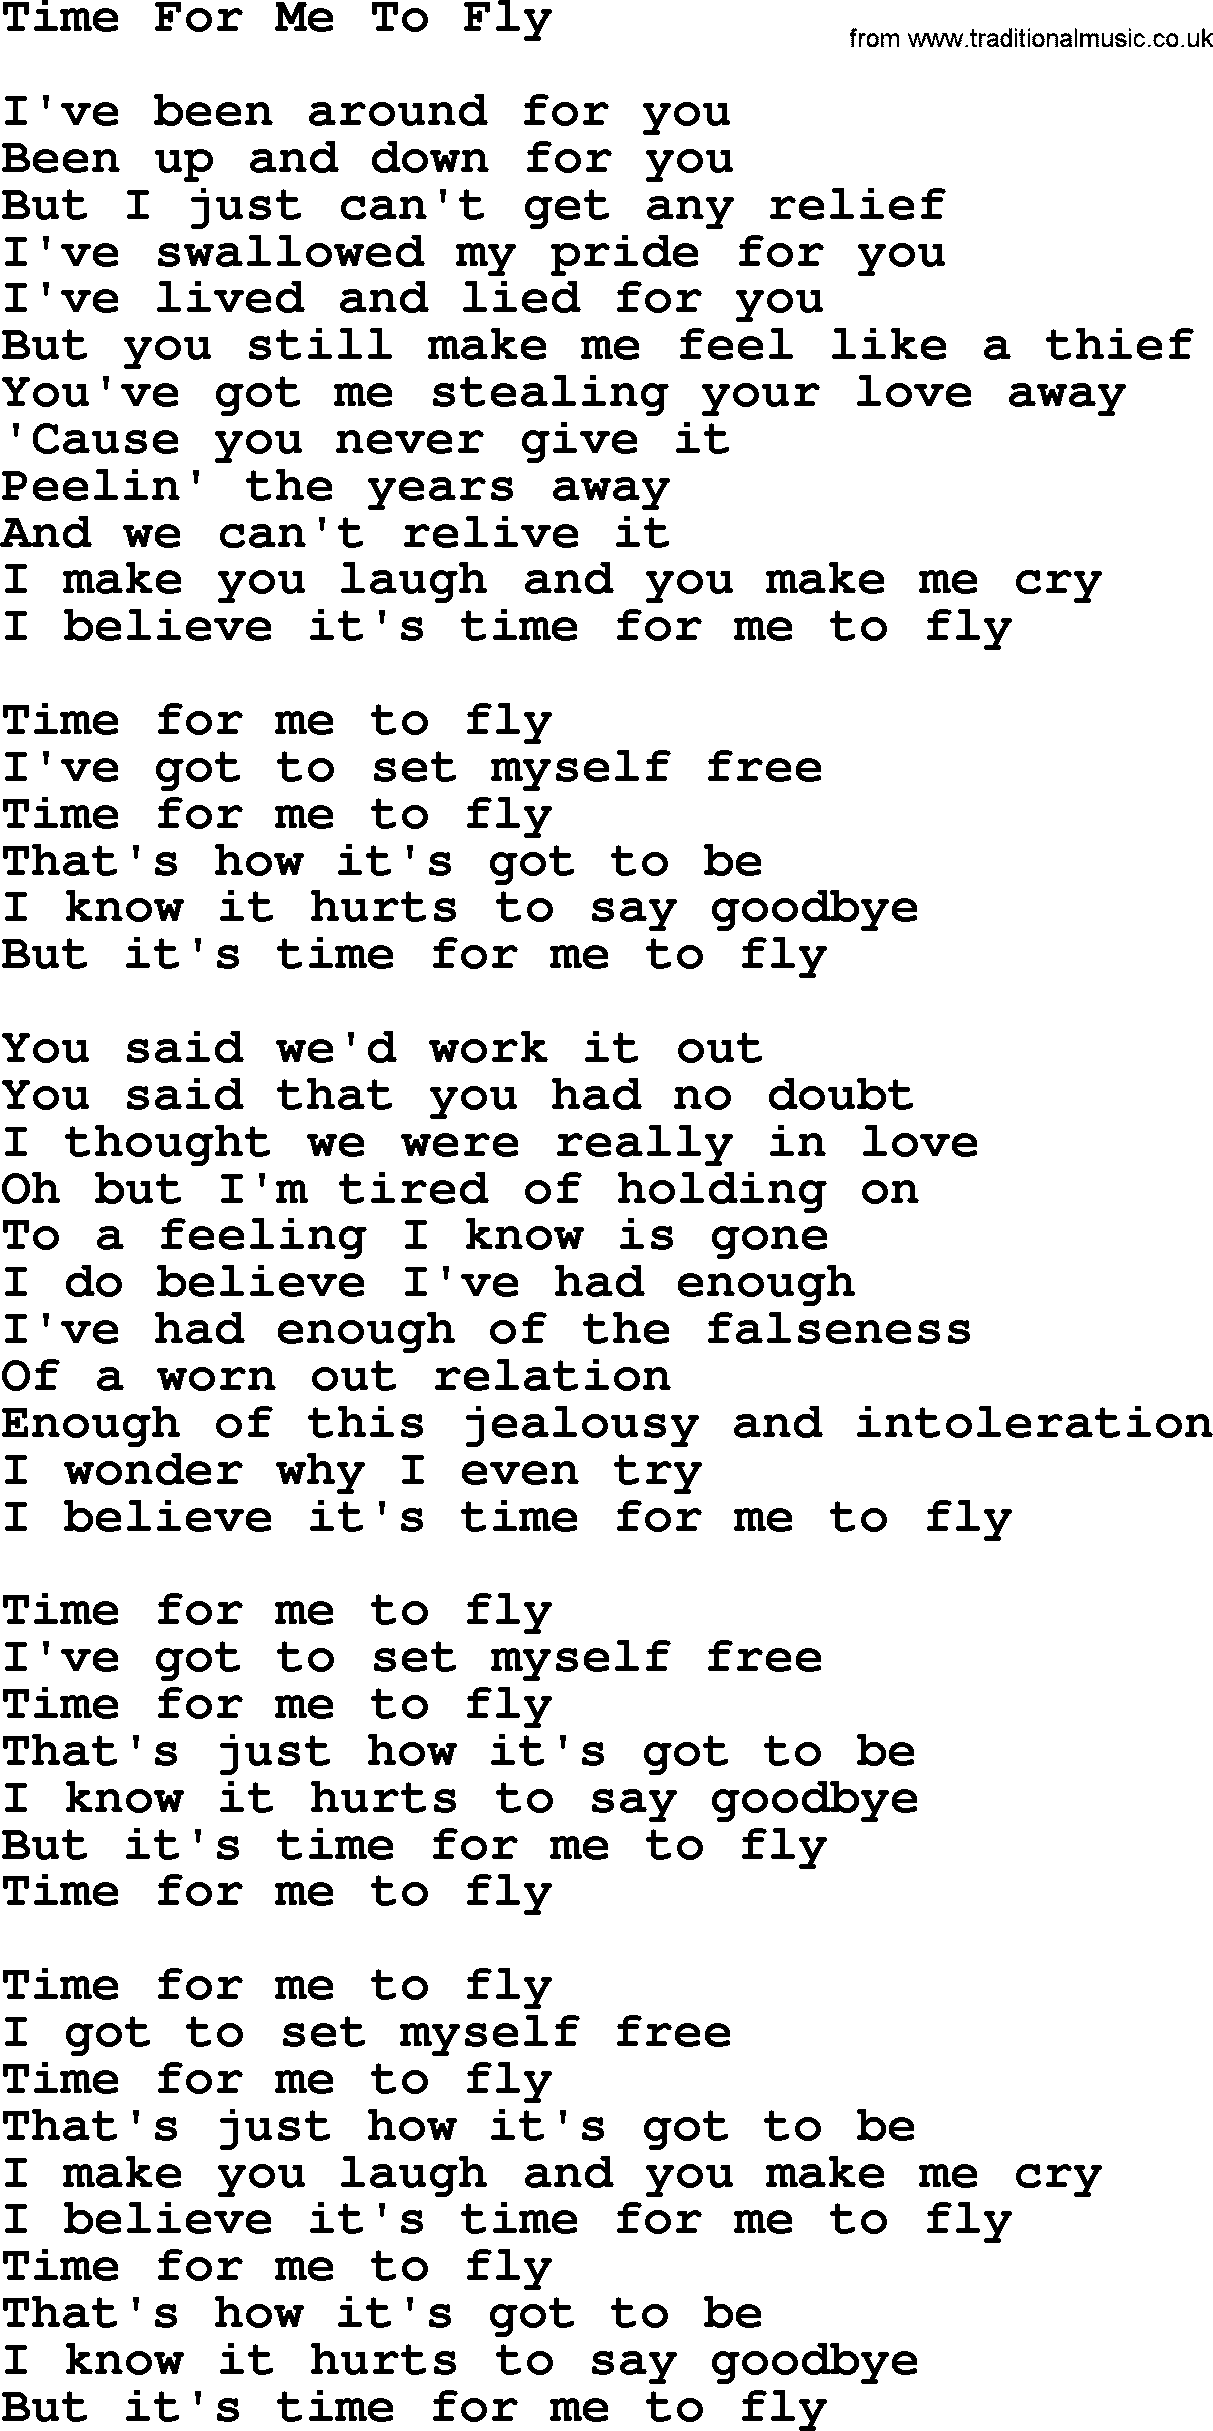 Dolly Parton song Time For Me To Fly.txt lyrics